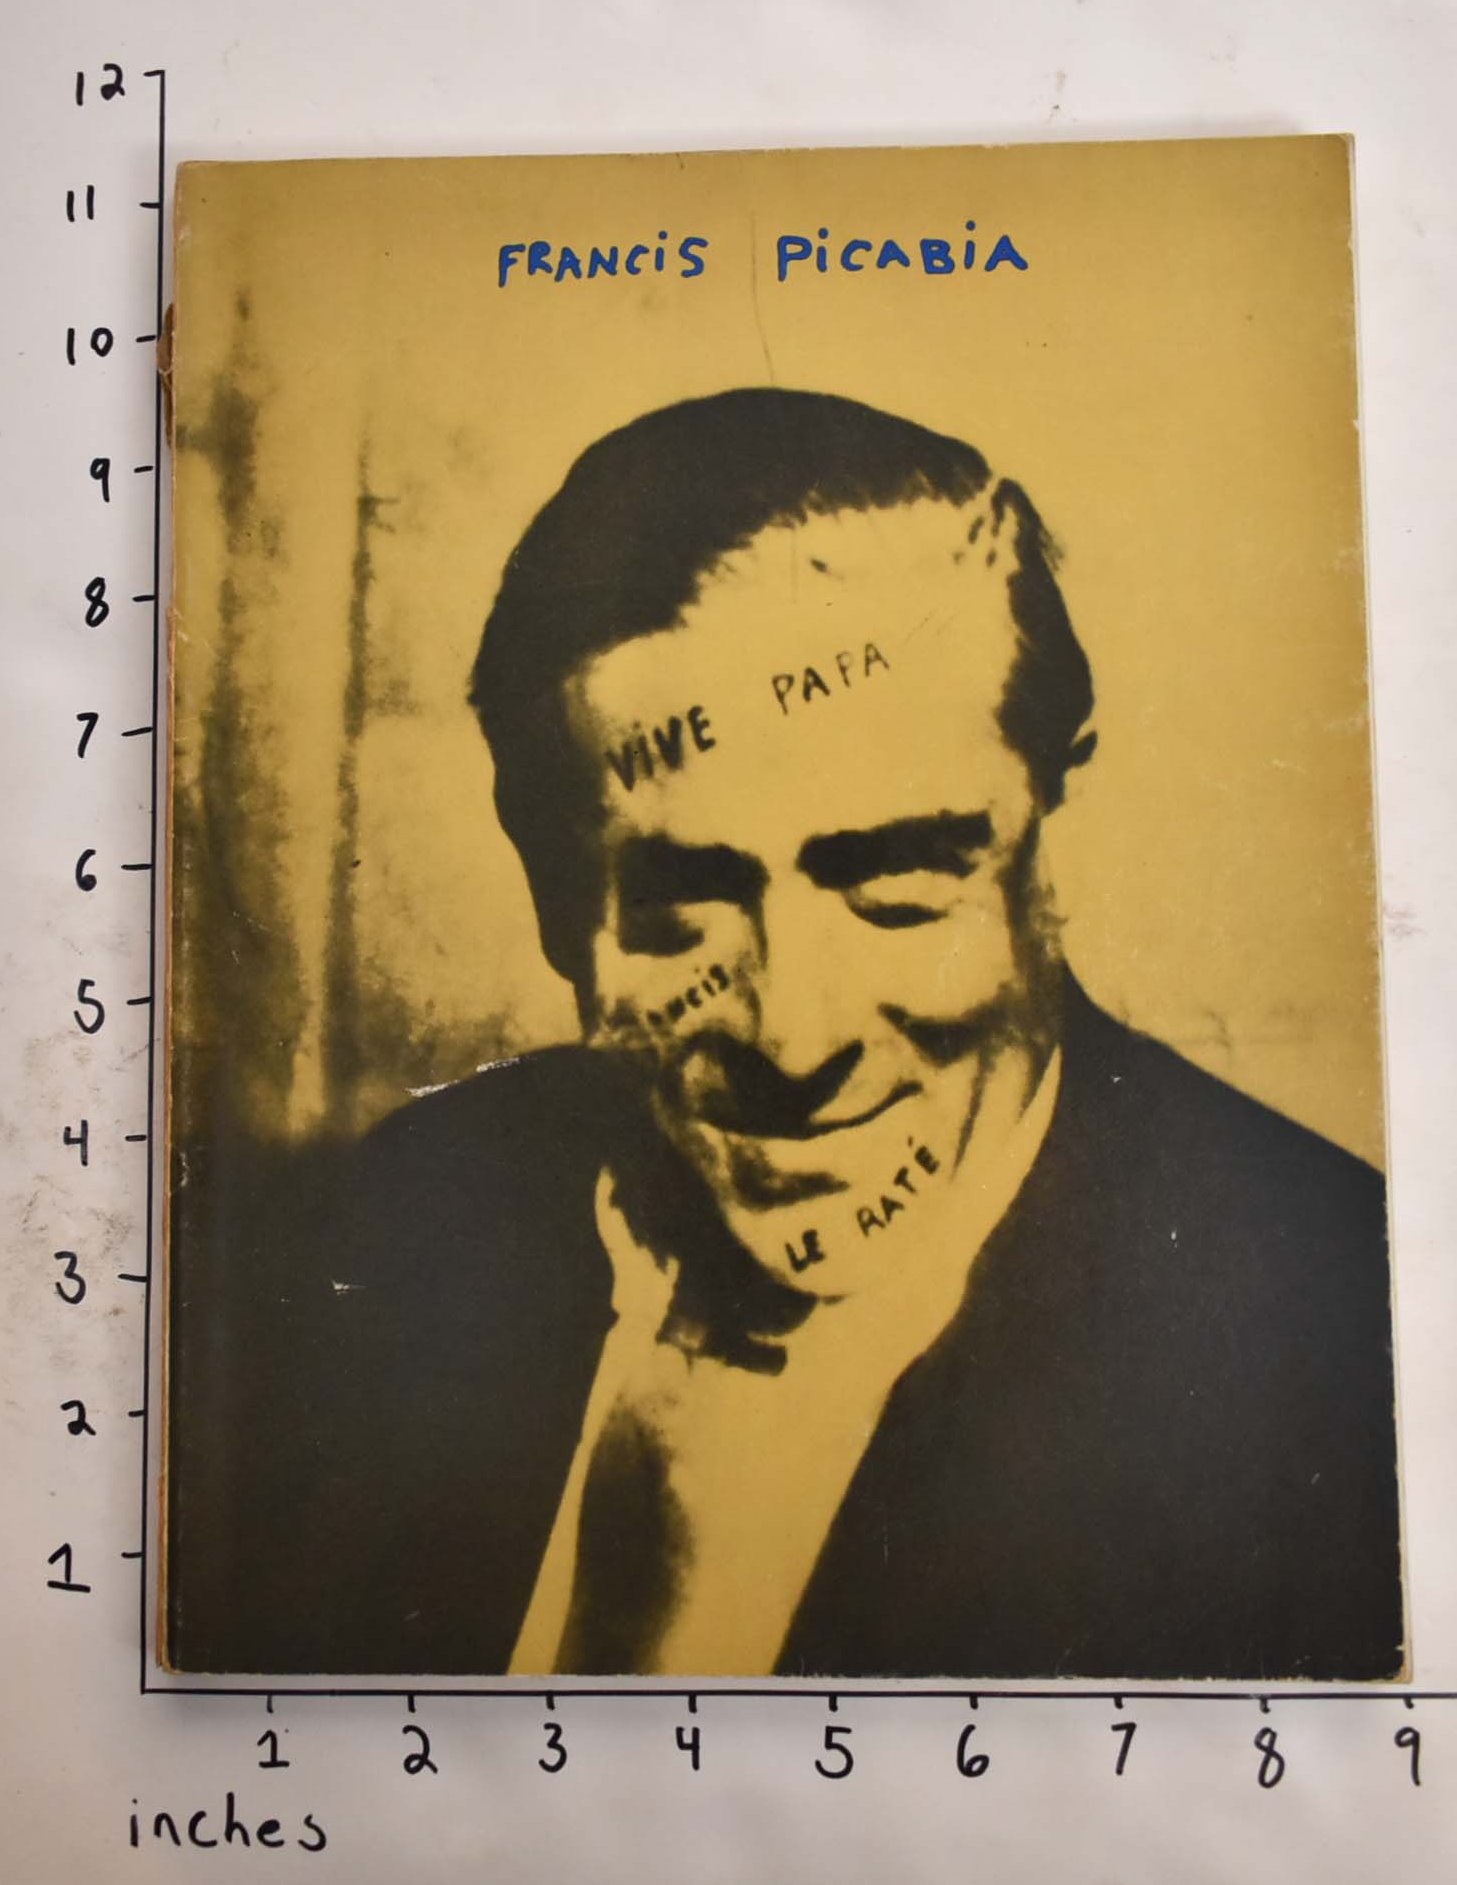 Francis Picabia - Camfield, William A.